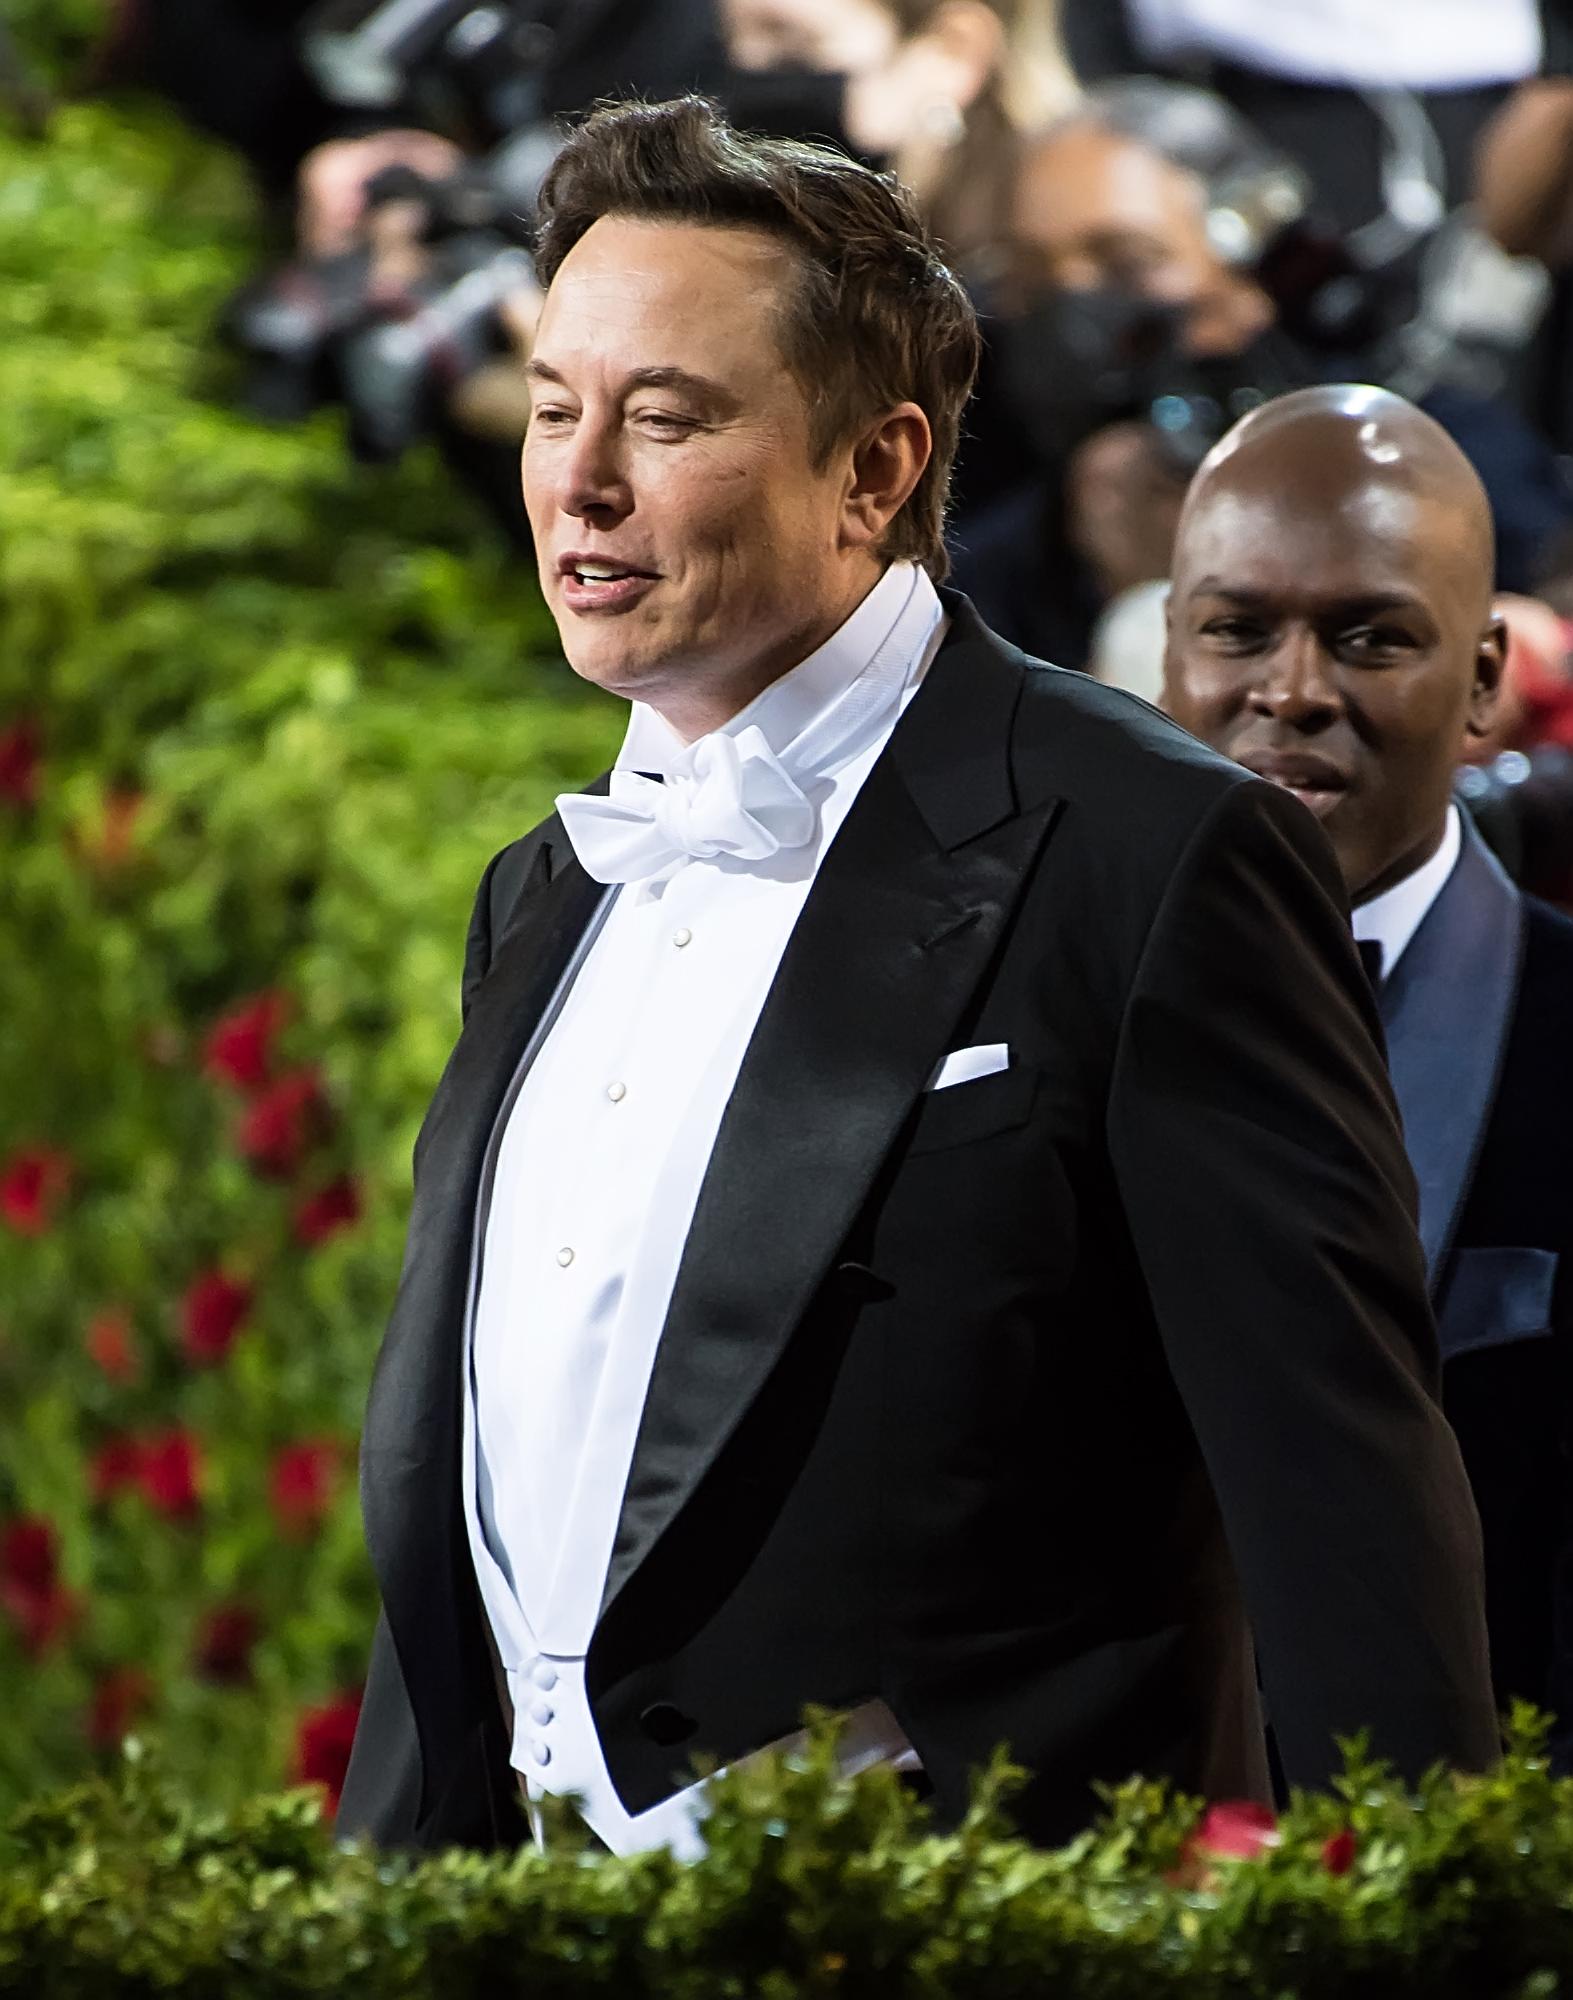 Elon Musk at The 2022 Met Gala Celebrating "In America: An Anthology Of Fashion" in New York City - Arrivals